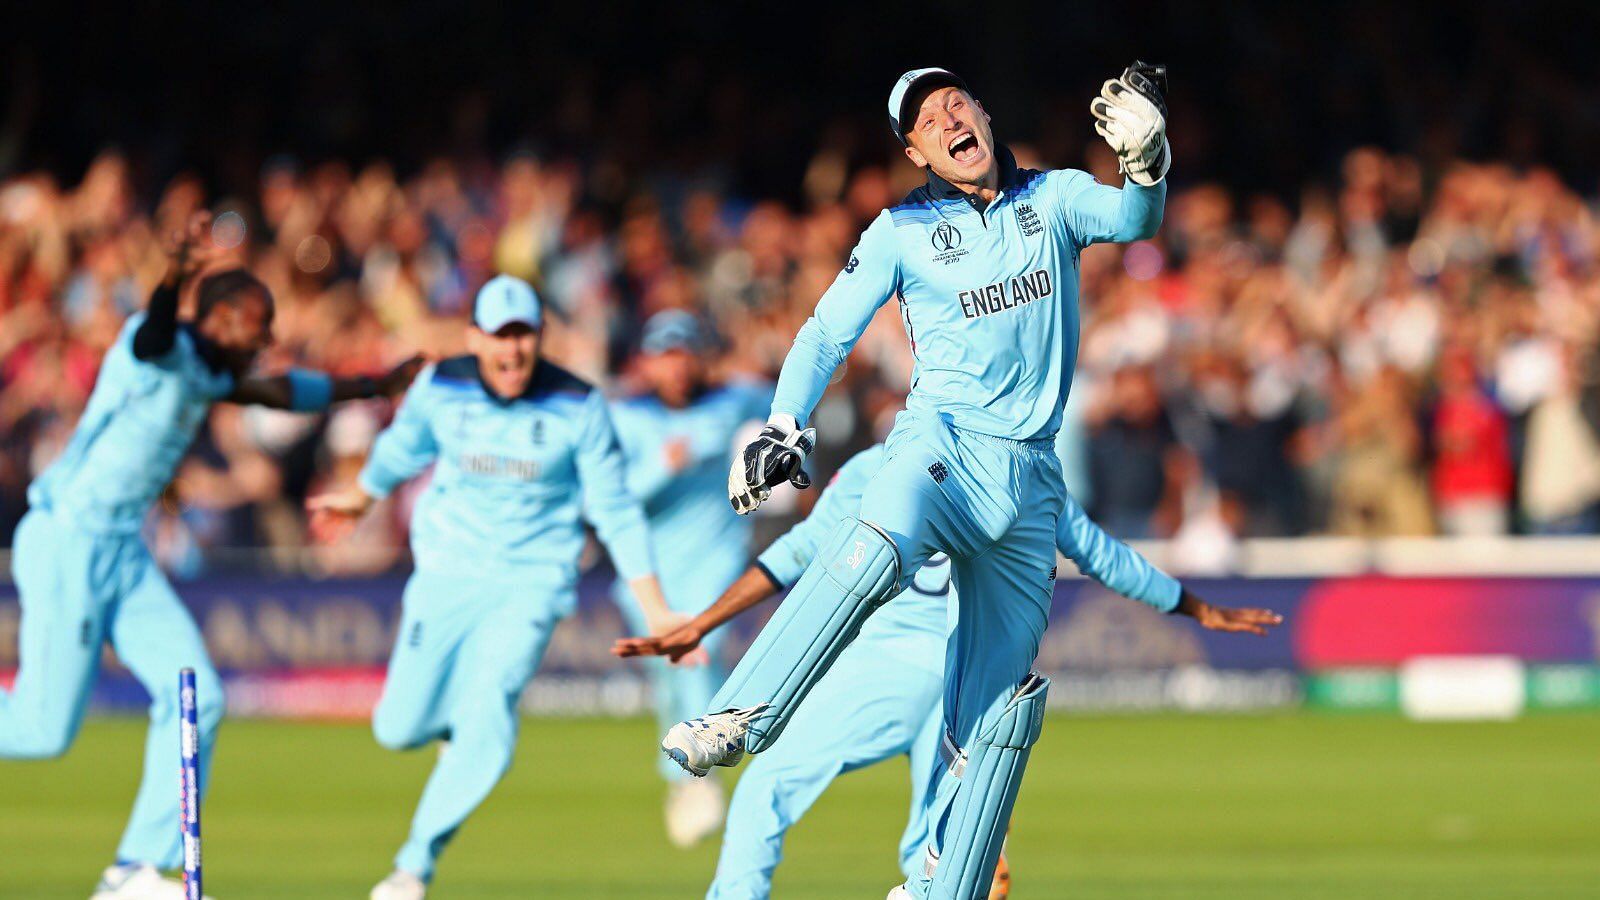 Watch highlights: England beat New Zealand to win the 2019 ICC World Cup.